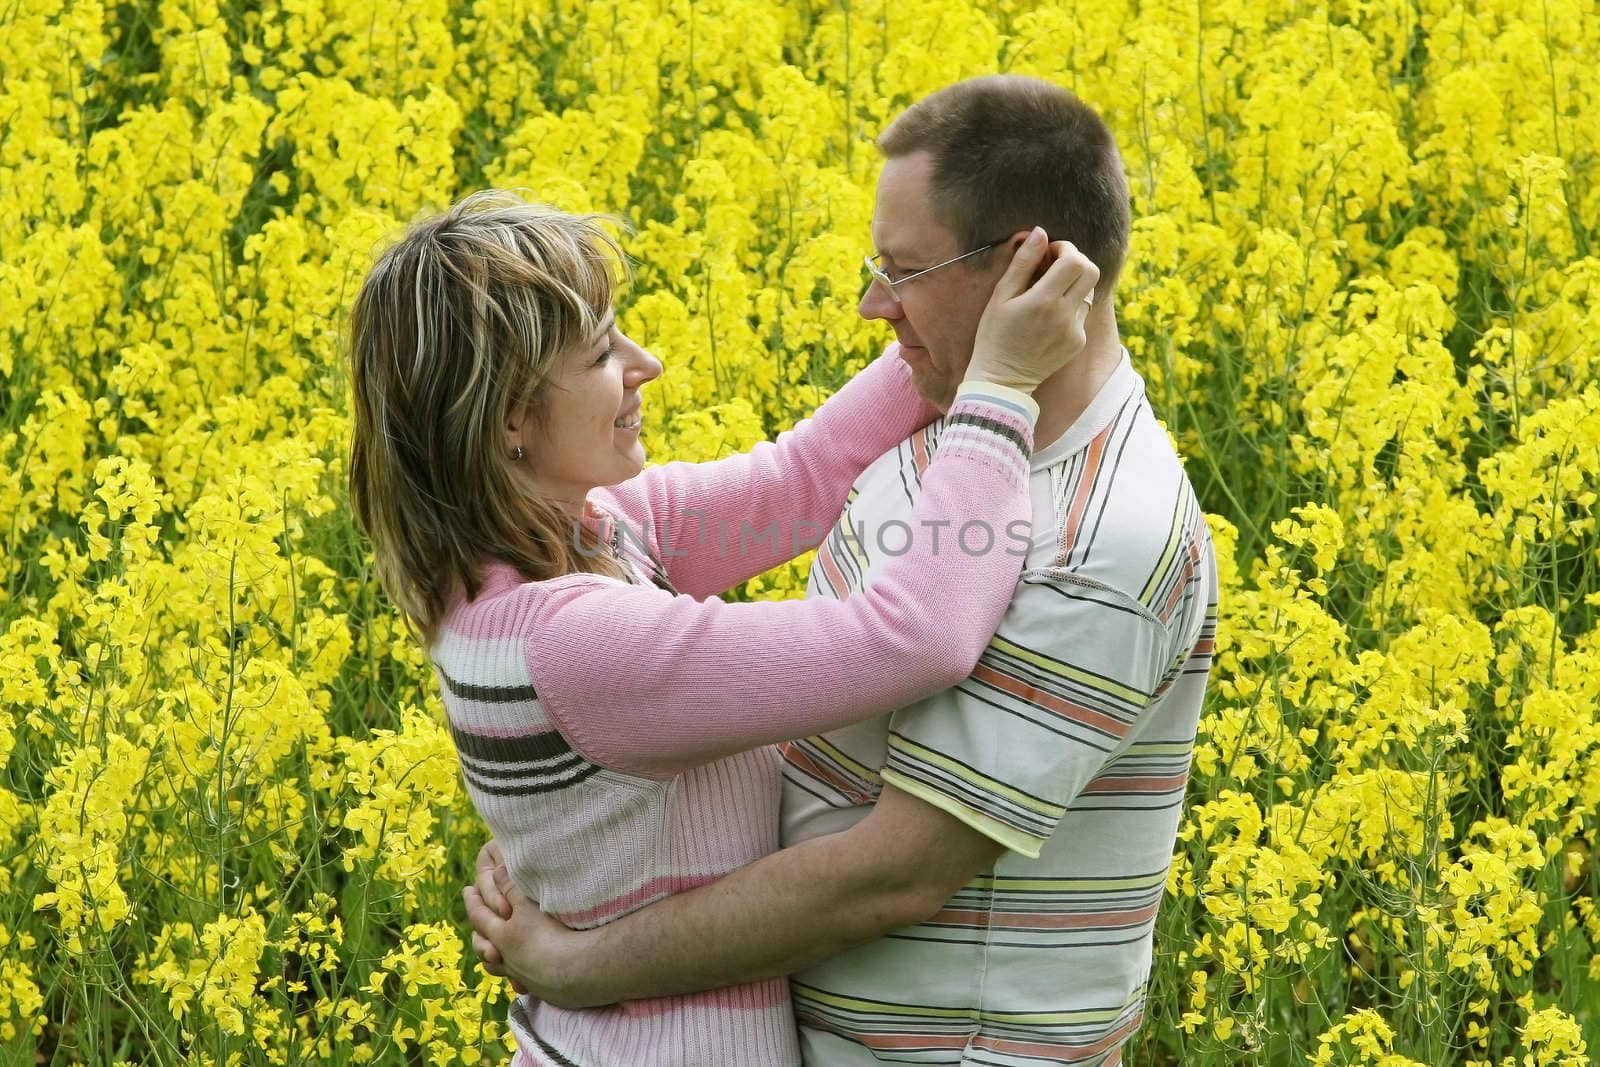 Happy and smiling middle-aged couple in the flower meadow.